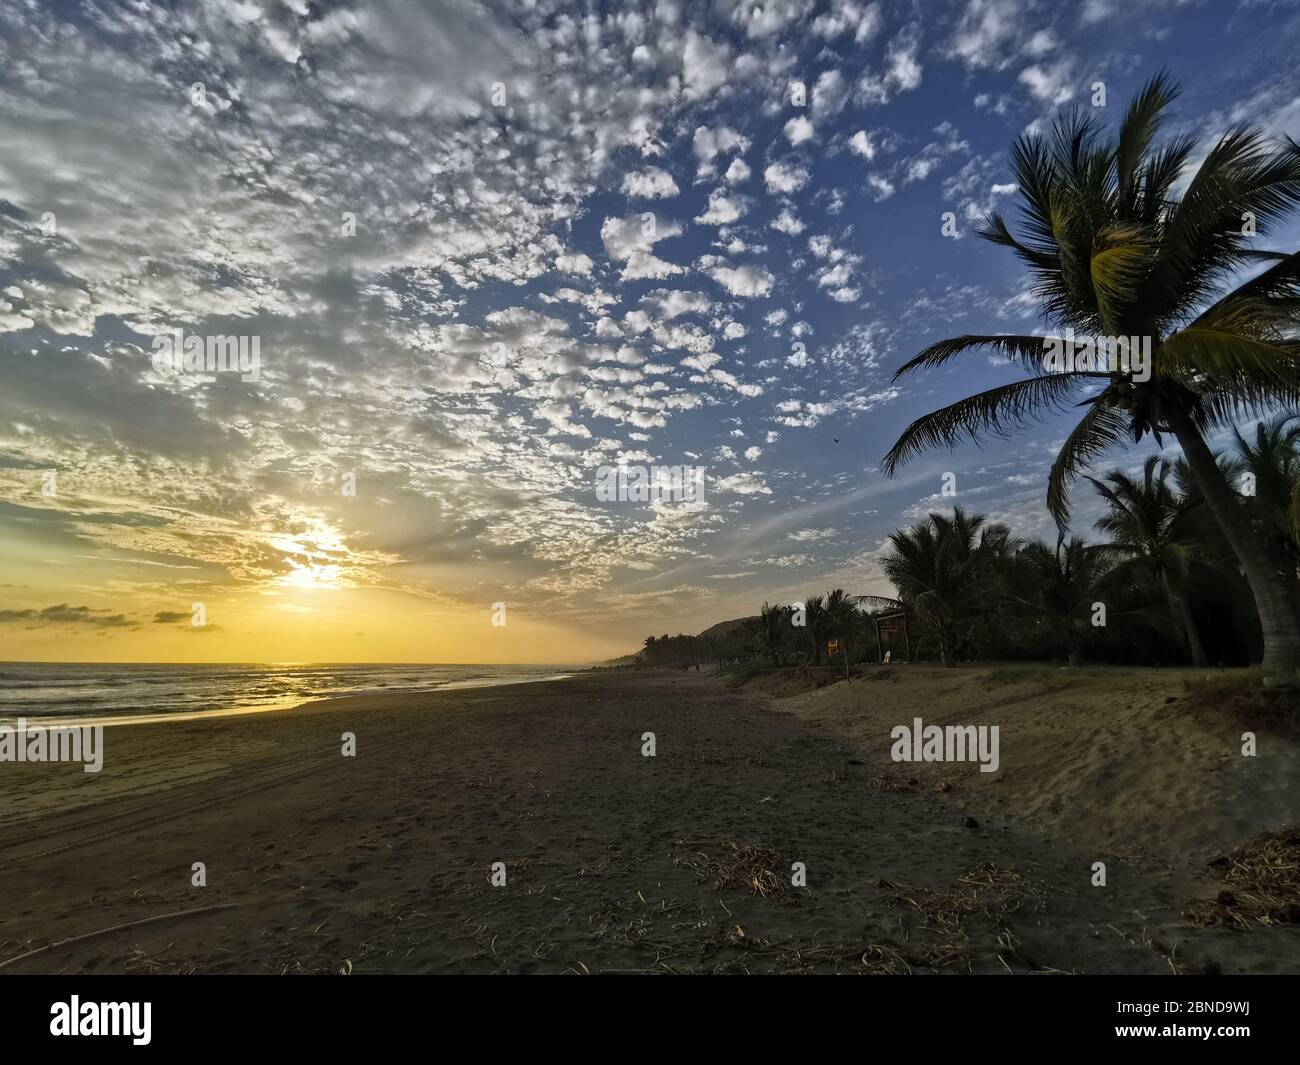 Clouds, beach, palms and sand. Stock Photo